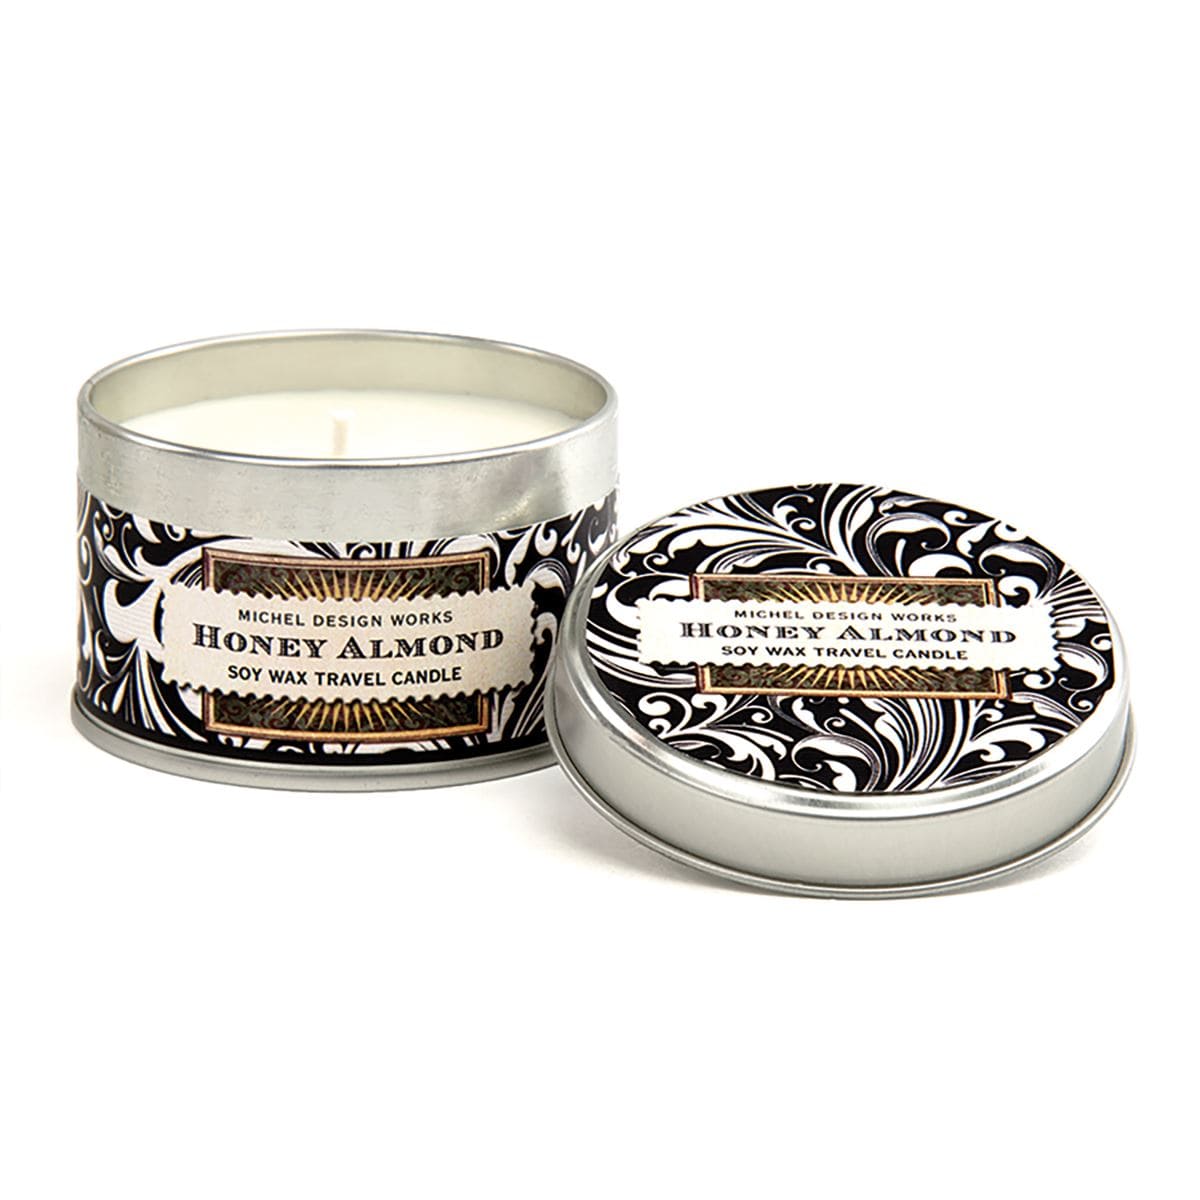 Honey Almond Soy Wax Travel Candle Michel Design Works Candles